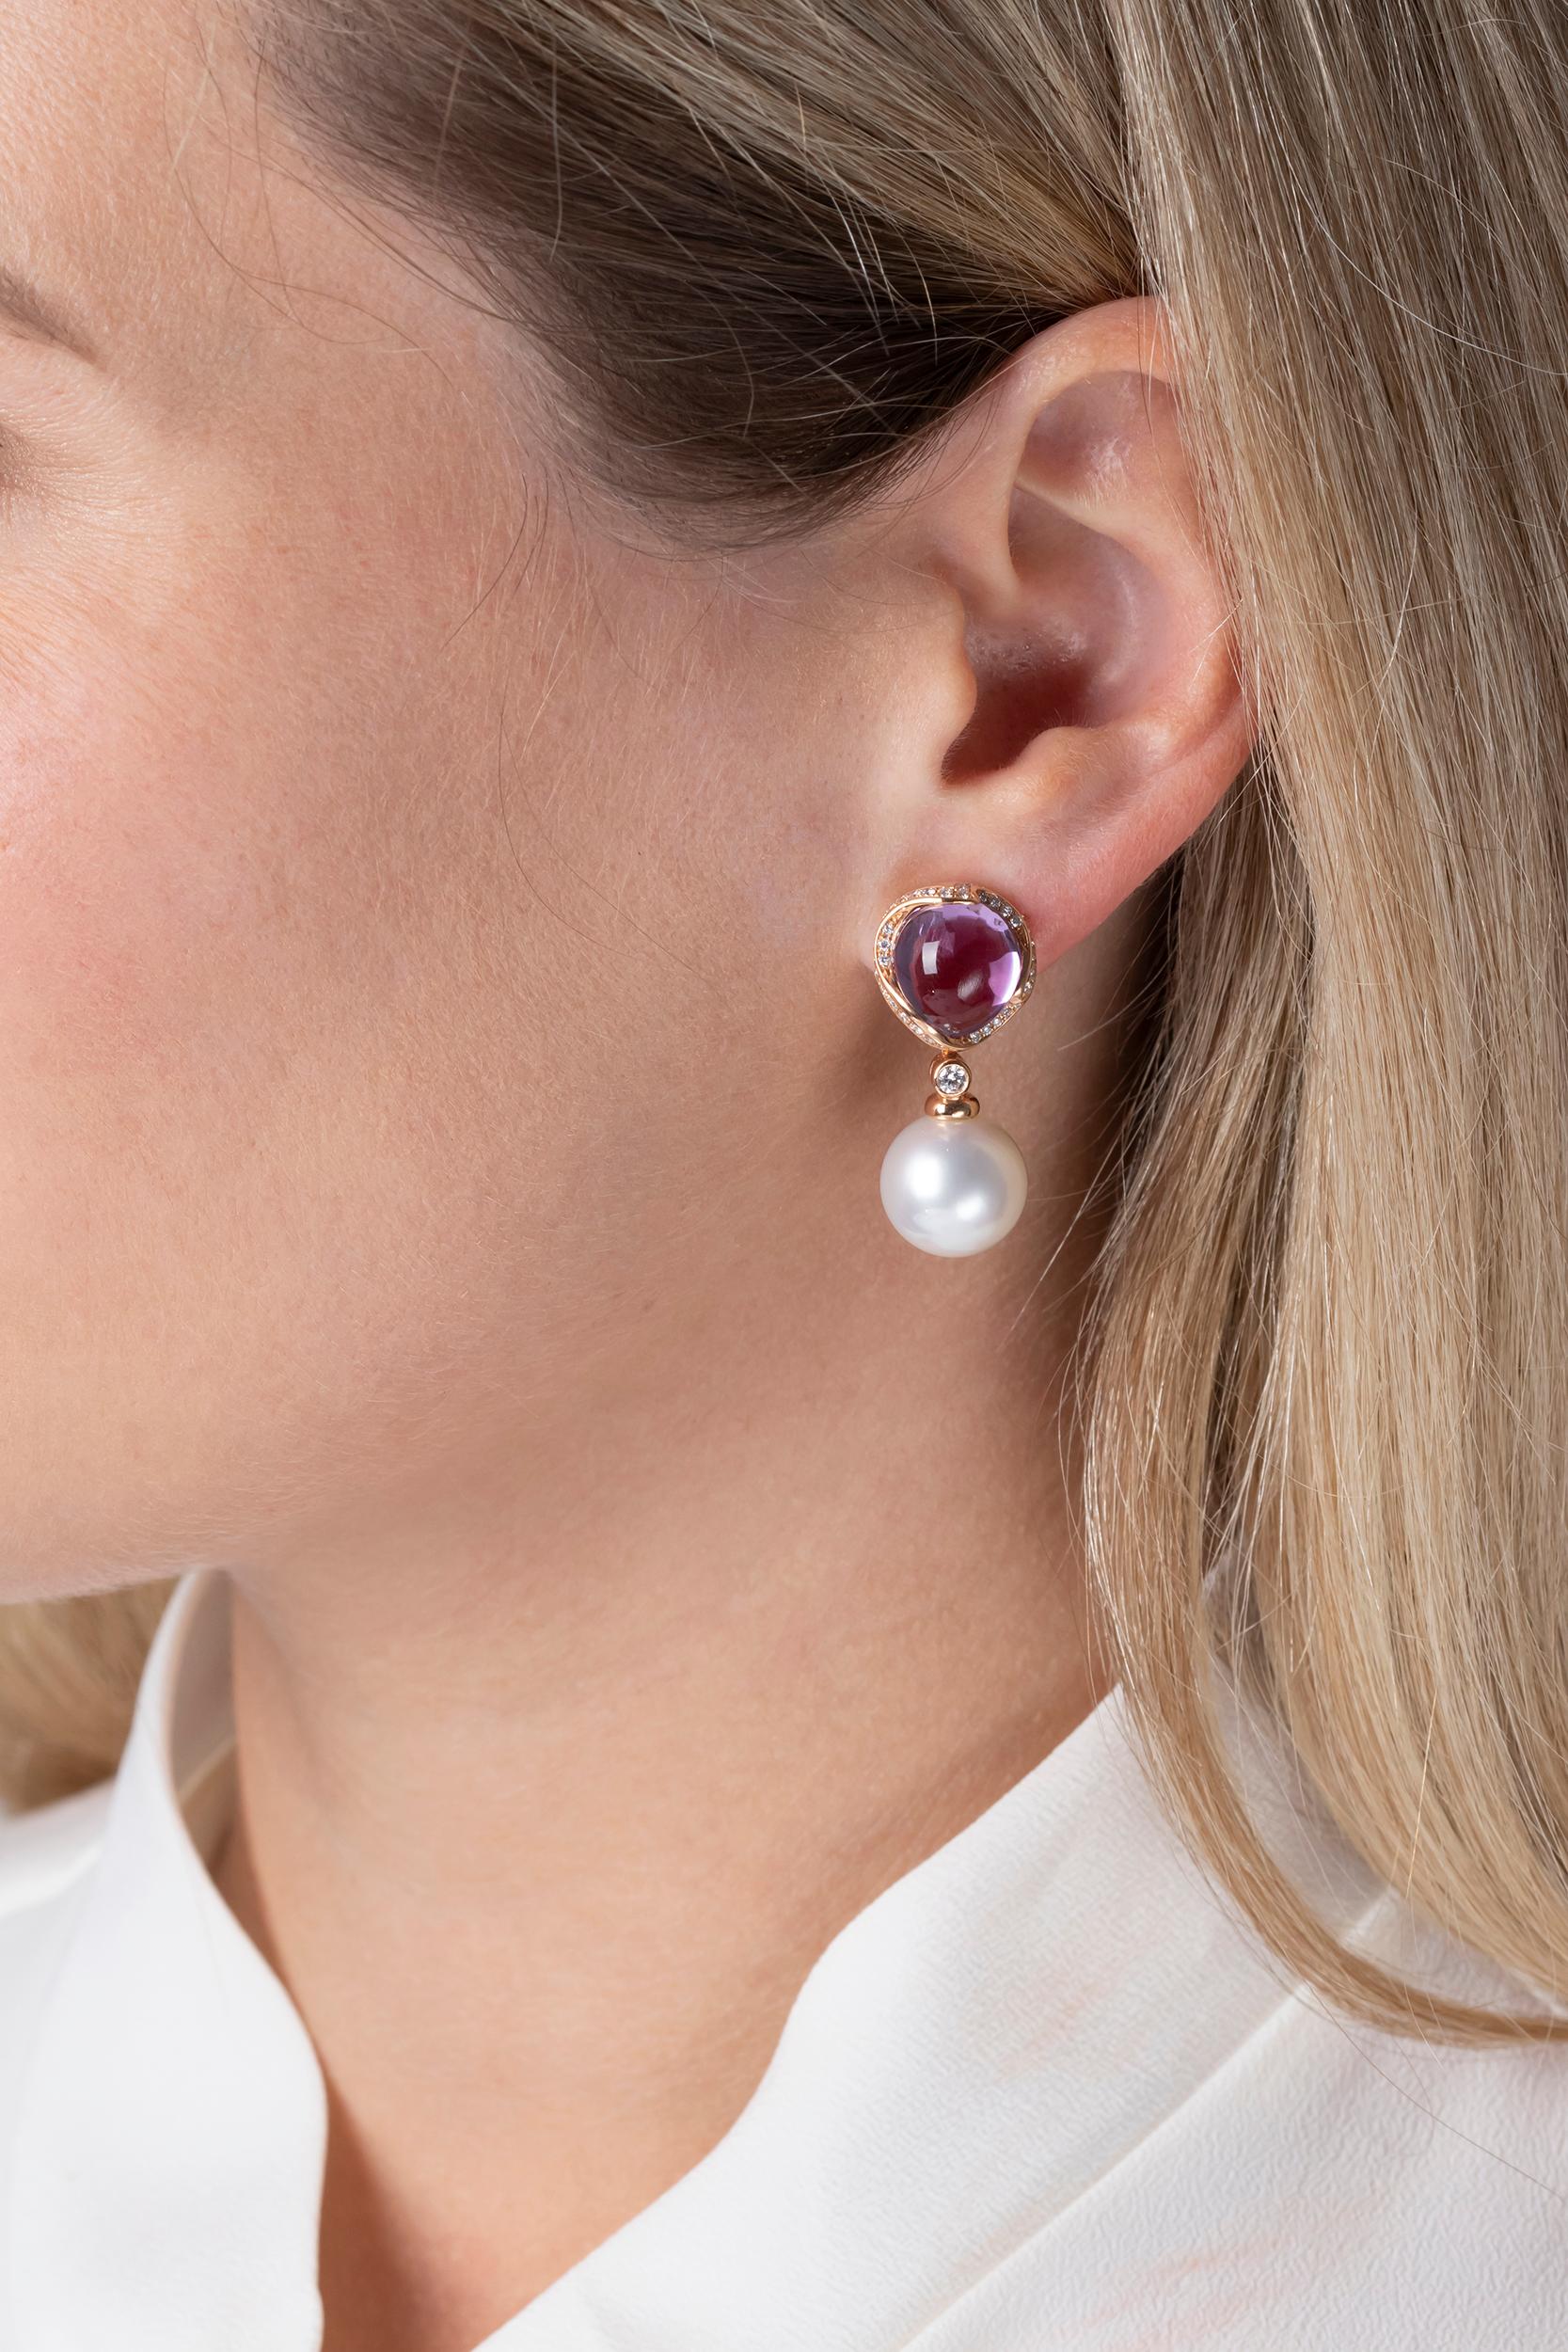 These unique earrings by Yoko London feature lustrous 12-13mm South Sea Pearls beneath vibrant amethysts and scintillating diamonds. Bold and striking, these one of a kind earrings will add a sumptuous pop of colour to any outfit. Hand-finished in